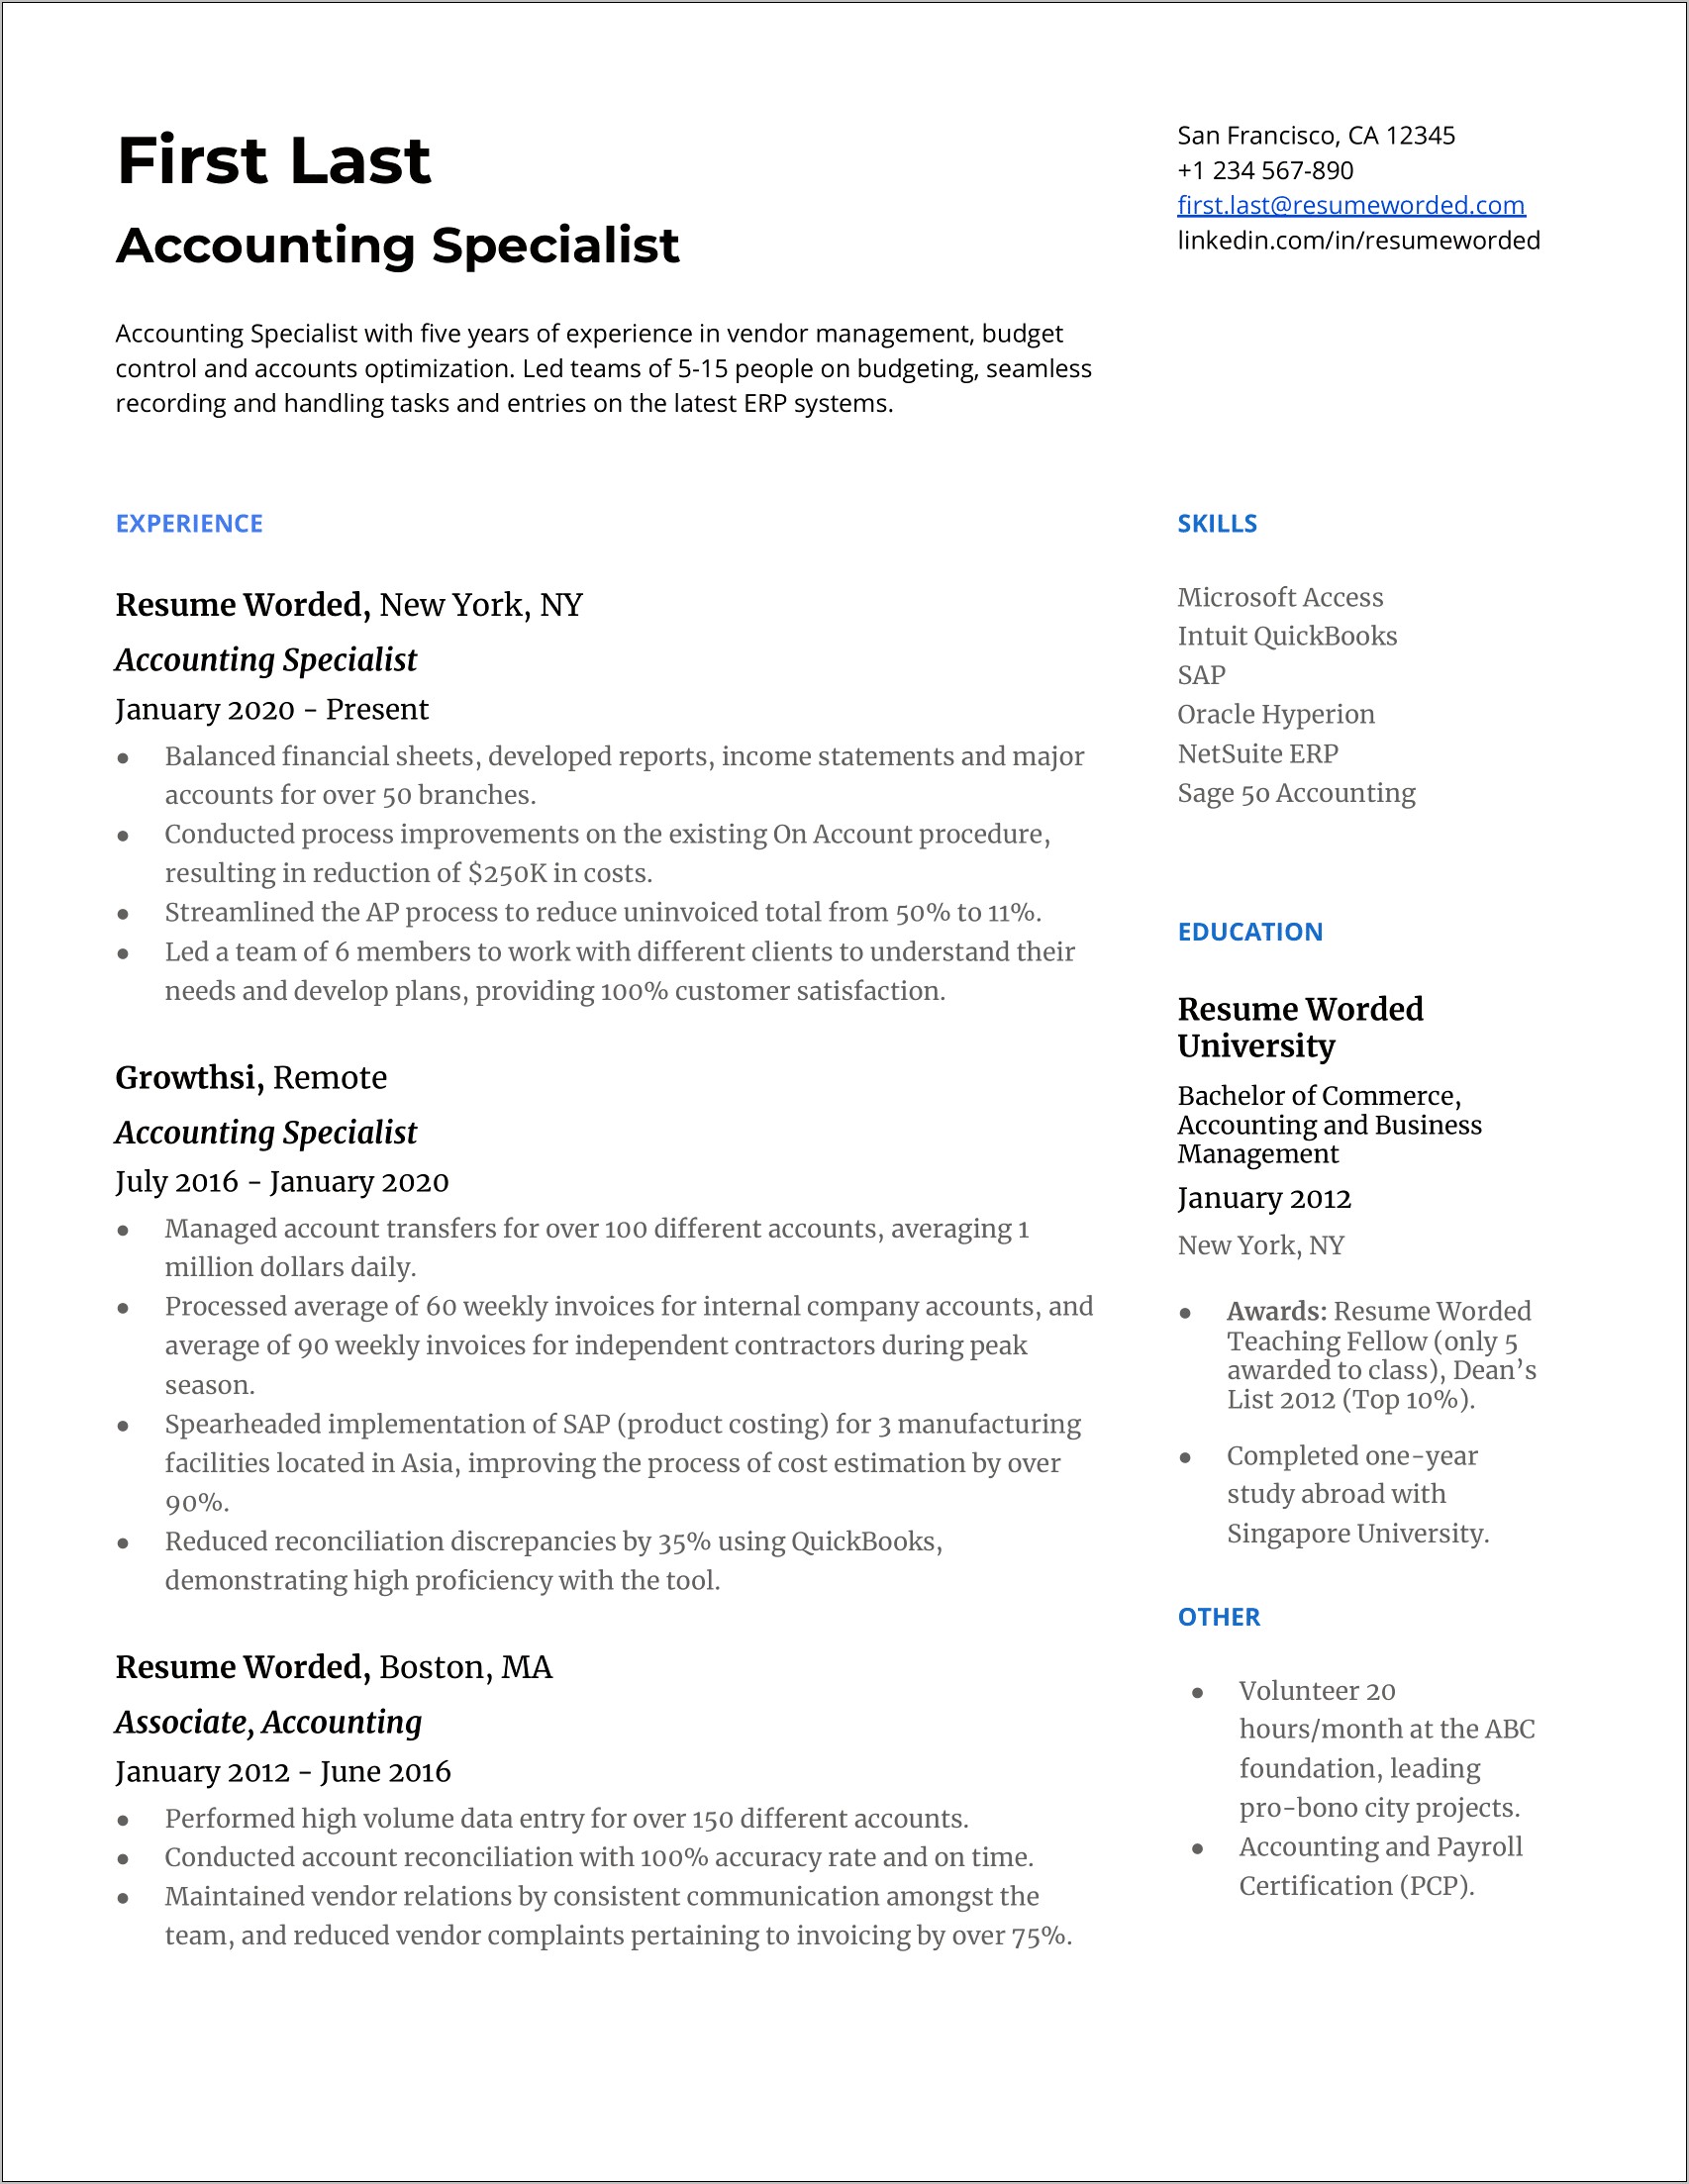 Customer Service Experience For Accounting Clerk Resume